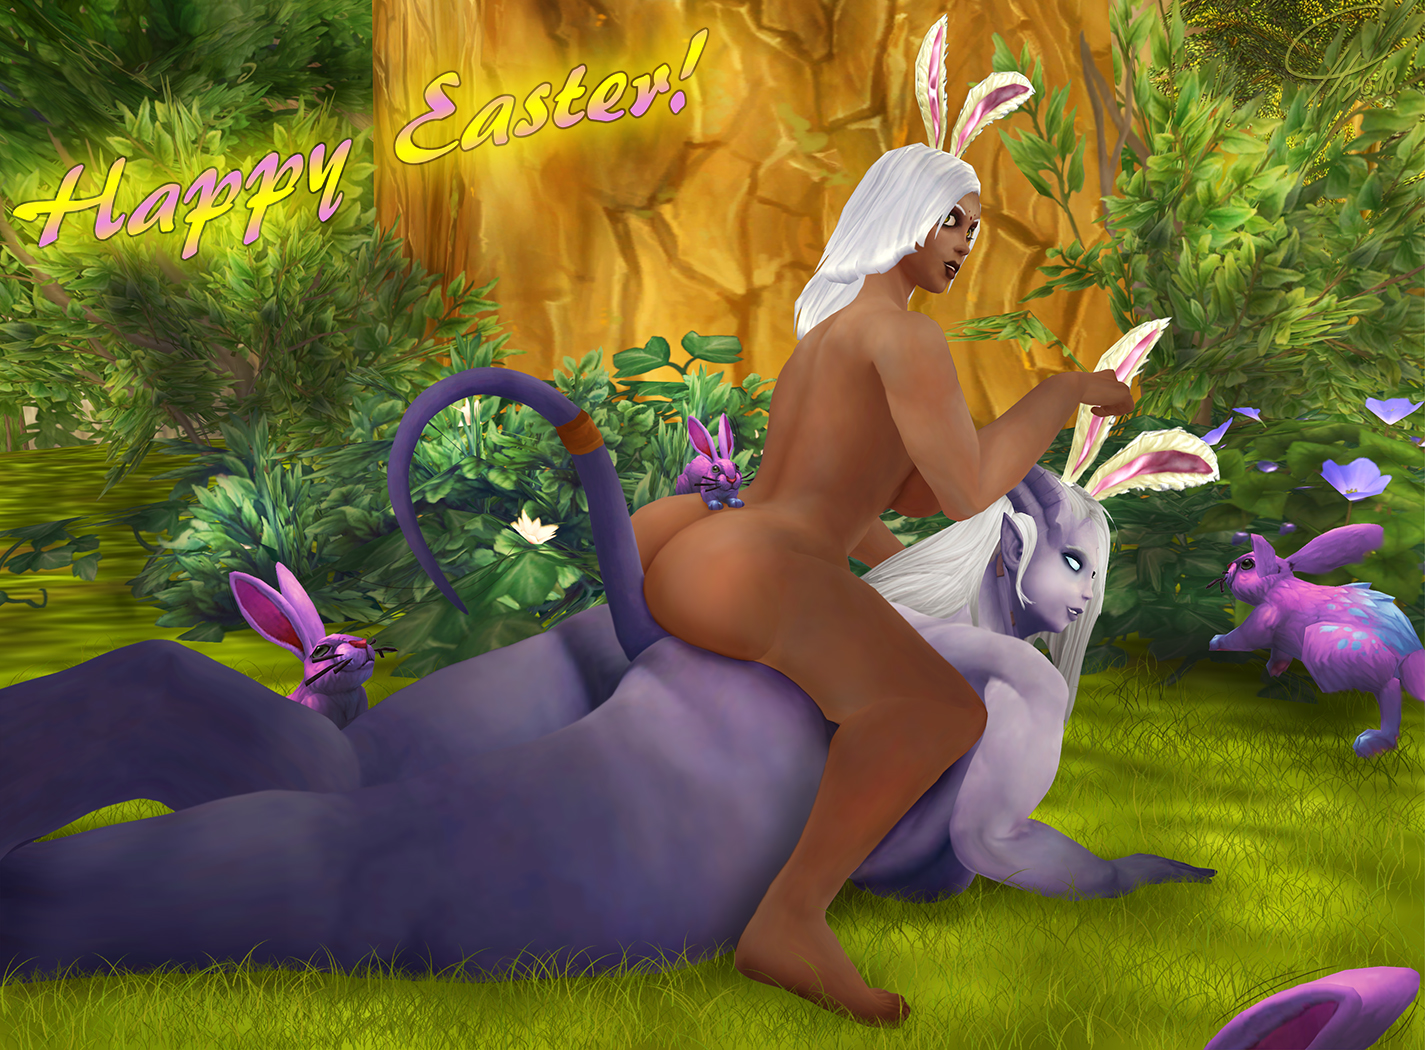 Urdina & Selanaar: Happy Easter! [Human/Draenei/Pinup/Tease]
Happy Easter 2018!
To celebrate the spring, the ladies wanted
to show more of their hindquarters for you.
[b][url=http://bakaras.com/murlocish/albums/userpics/10001/UrdUndSelEasterButtXL.jpg]==XL-Size Edit==?[/url][/b]
Keywords: Human;OC;Draenei;Pinup;Tease